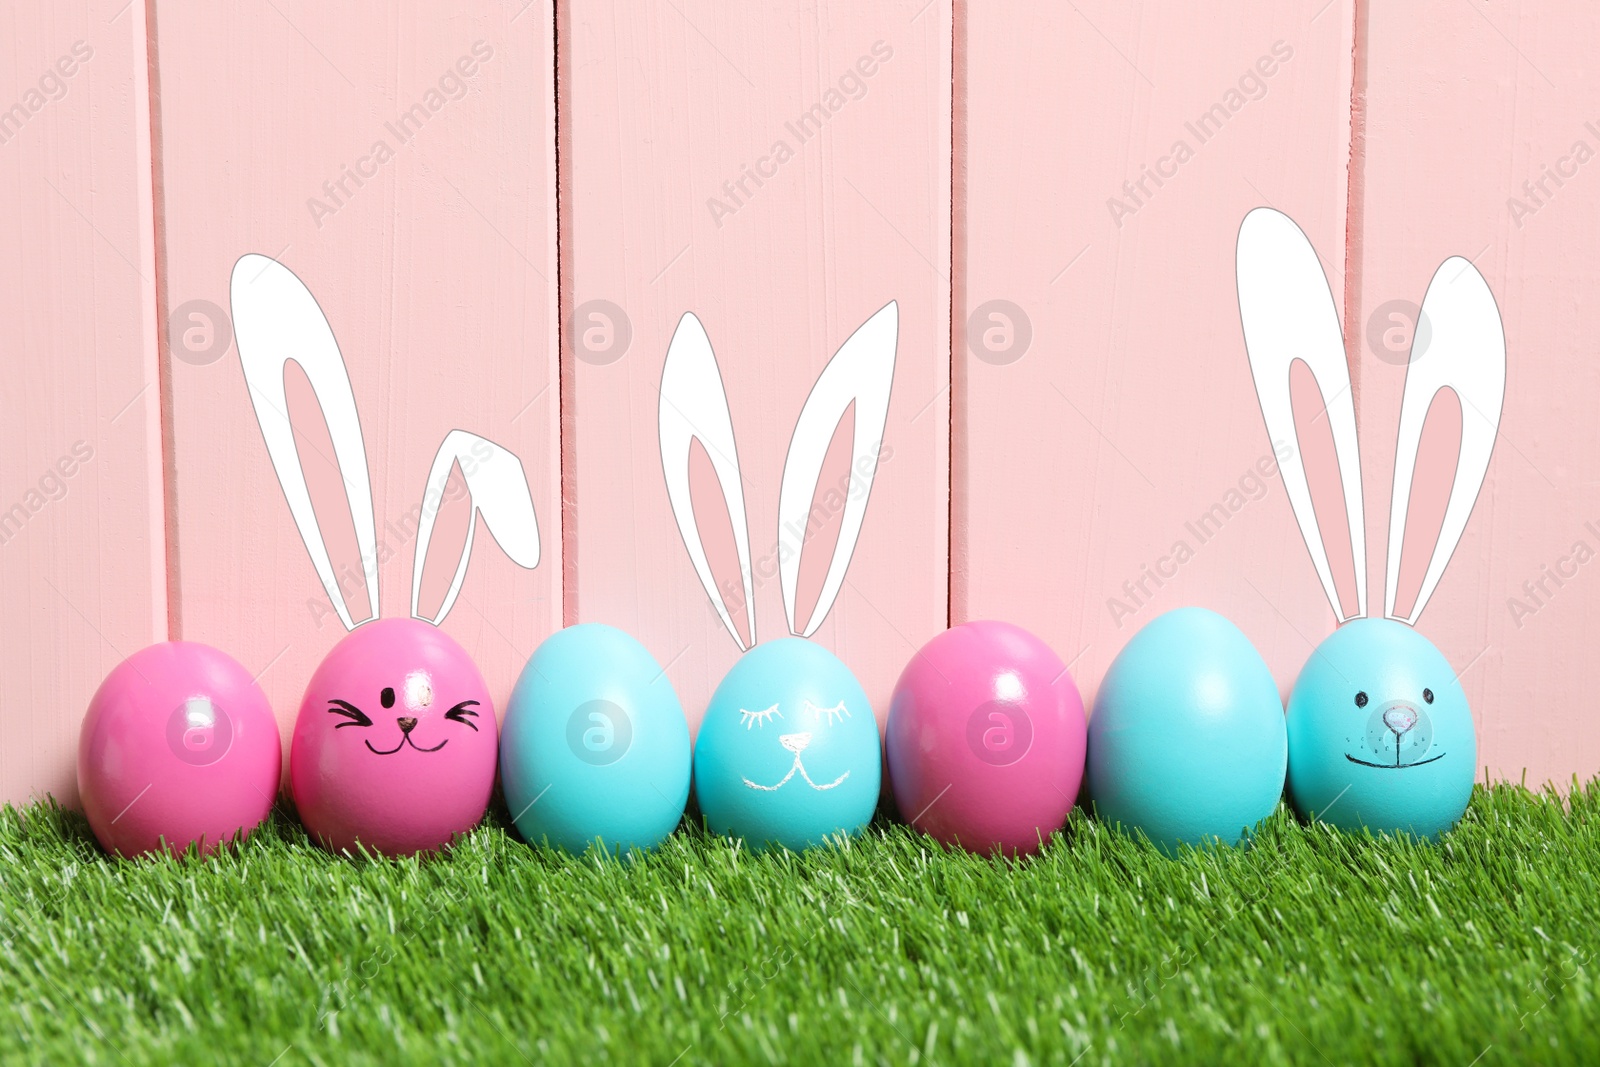 Image of Several eggs with drawn faces and ears as Easter bunnies among others on green grass against pink wooden background